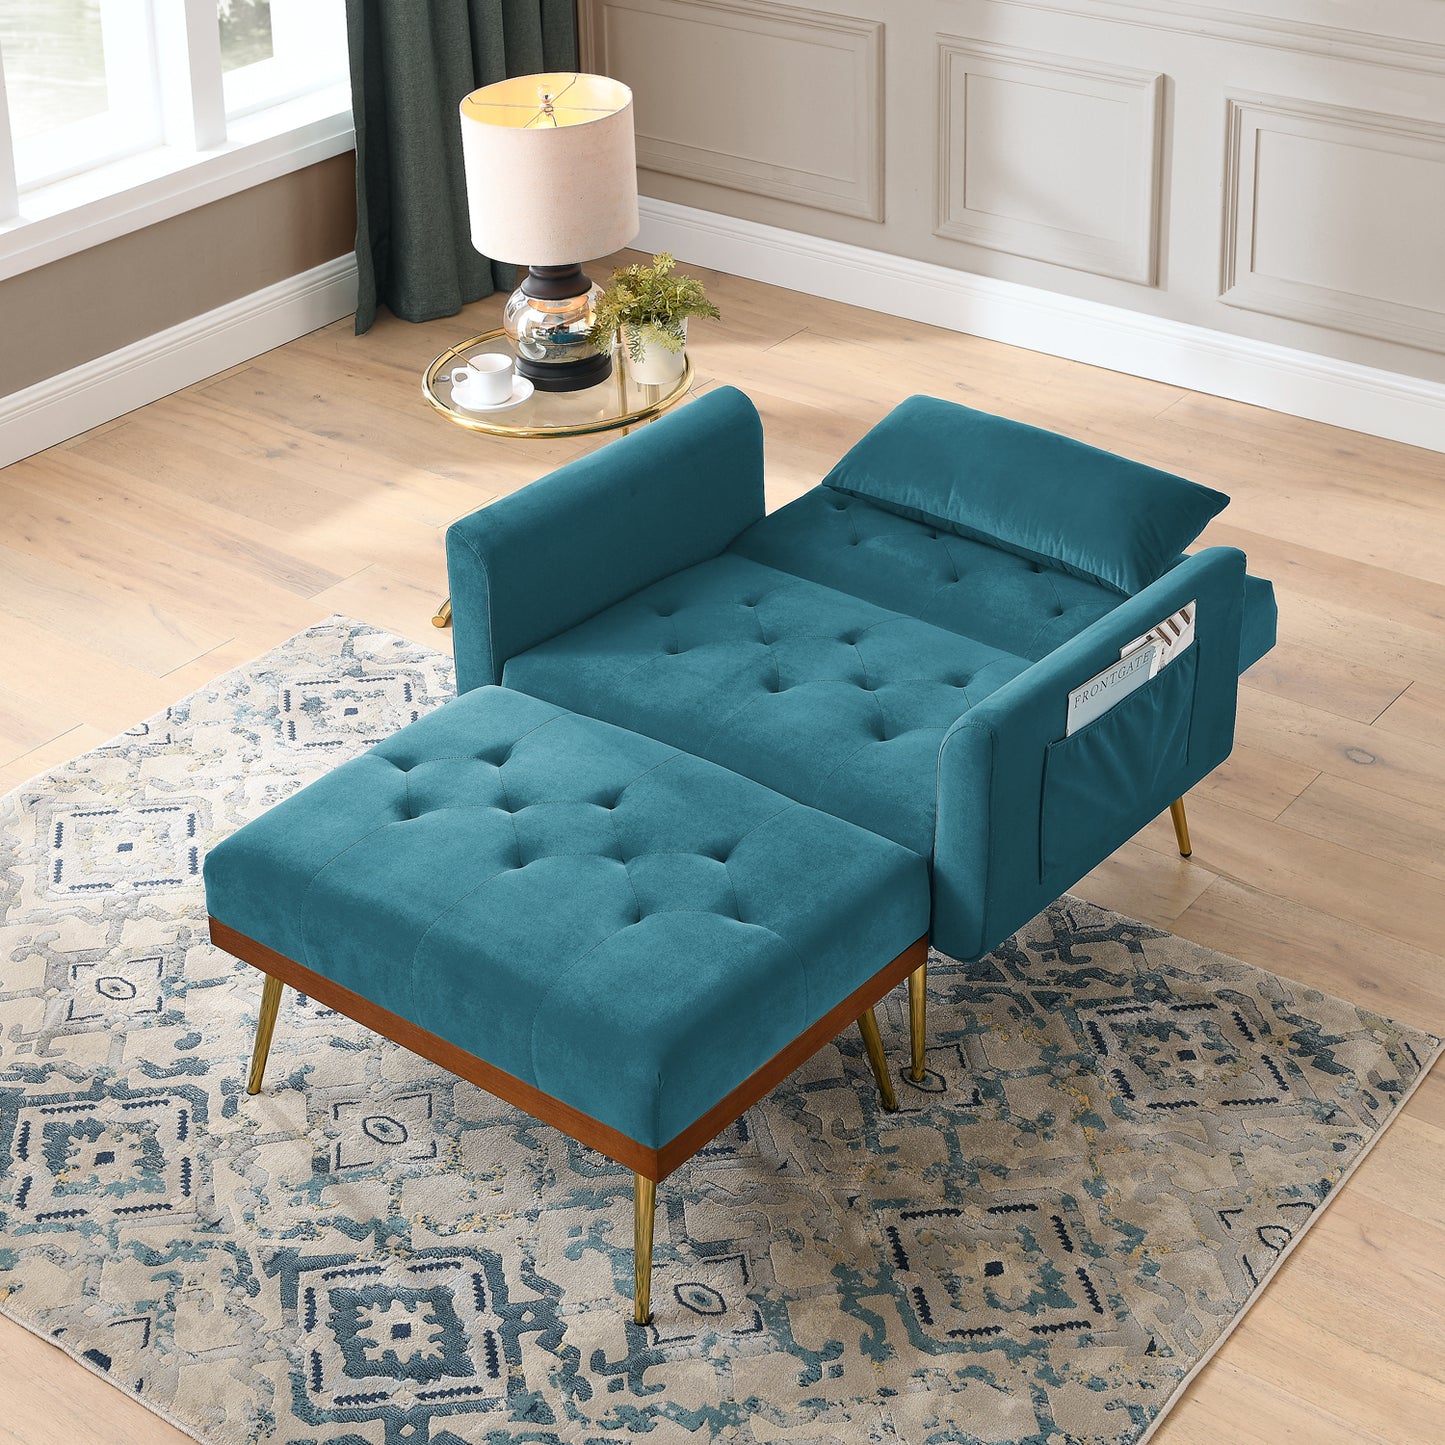 Recline Sofa Chair with Ottoman,Two Arm Pocket and Wood Frame include 1 Pillow, Teal (40.5"x33"x32")